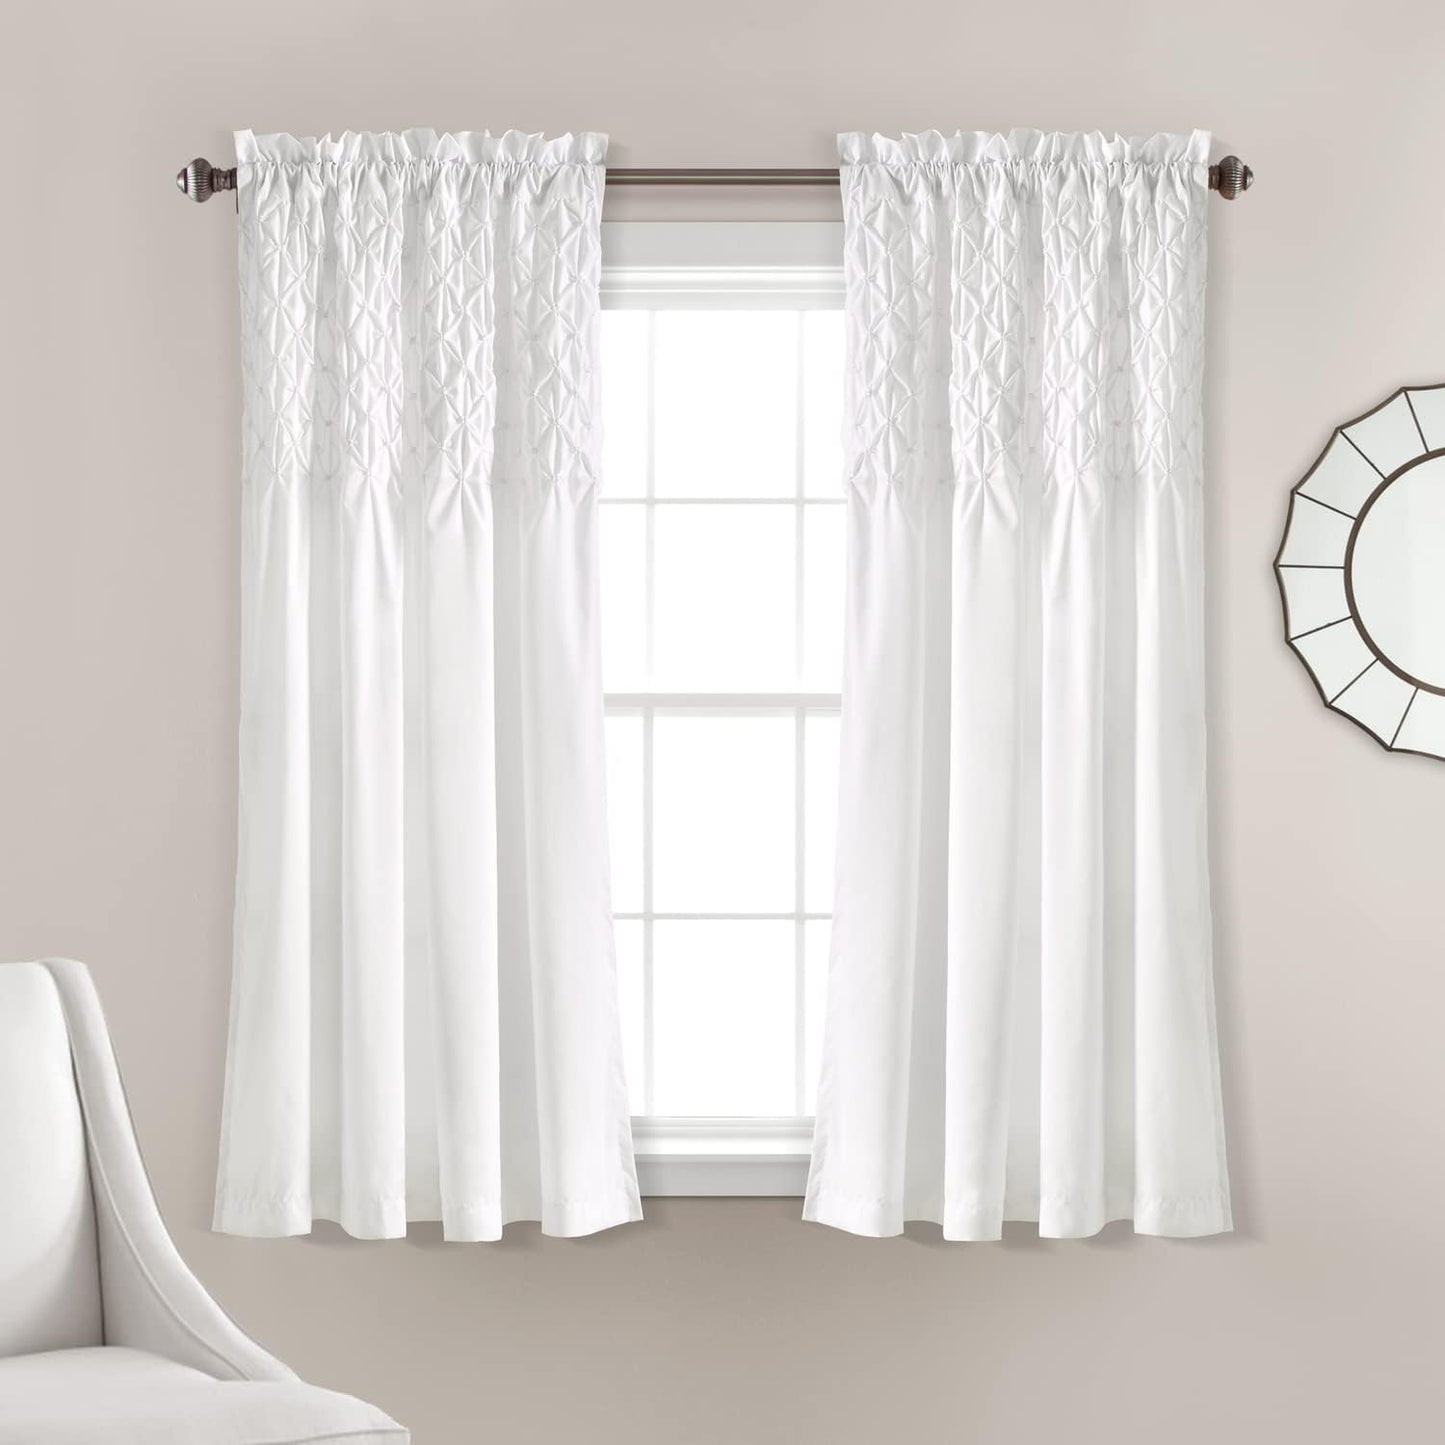 Lush Decor Bayview Curtains-Pintuck Textured Semi Sheer Window Panel Drapes Set for Living, Dining, Bedroom (Pair), 54" W X 84" L, White  Triangle Home Fashions White 54"W X 63"L 